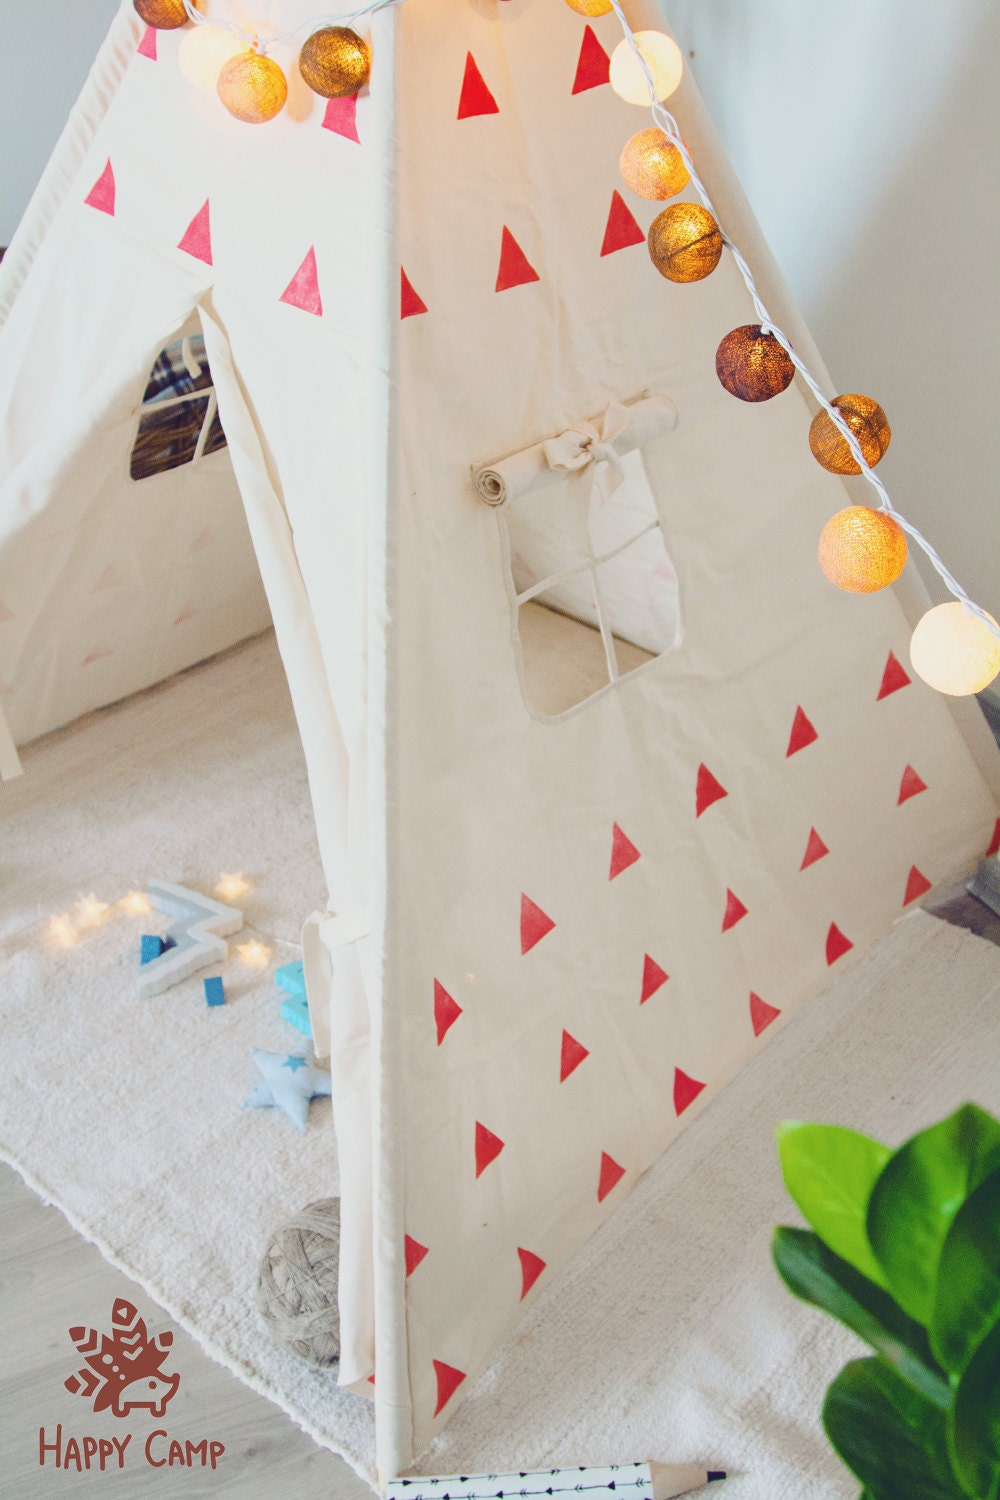 RED canvas Tipi, Tent, Tipi, Play tent, Play house, Wigwam, Vig vam, Tent for kids, Kids Teepee, Kids Tent, Teepee tent, Hand printed